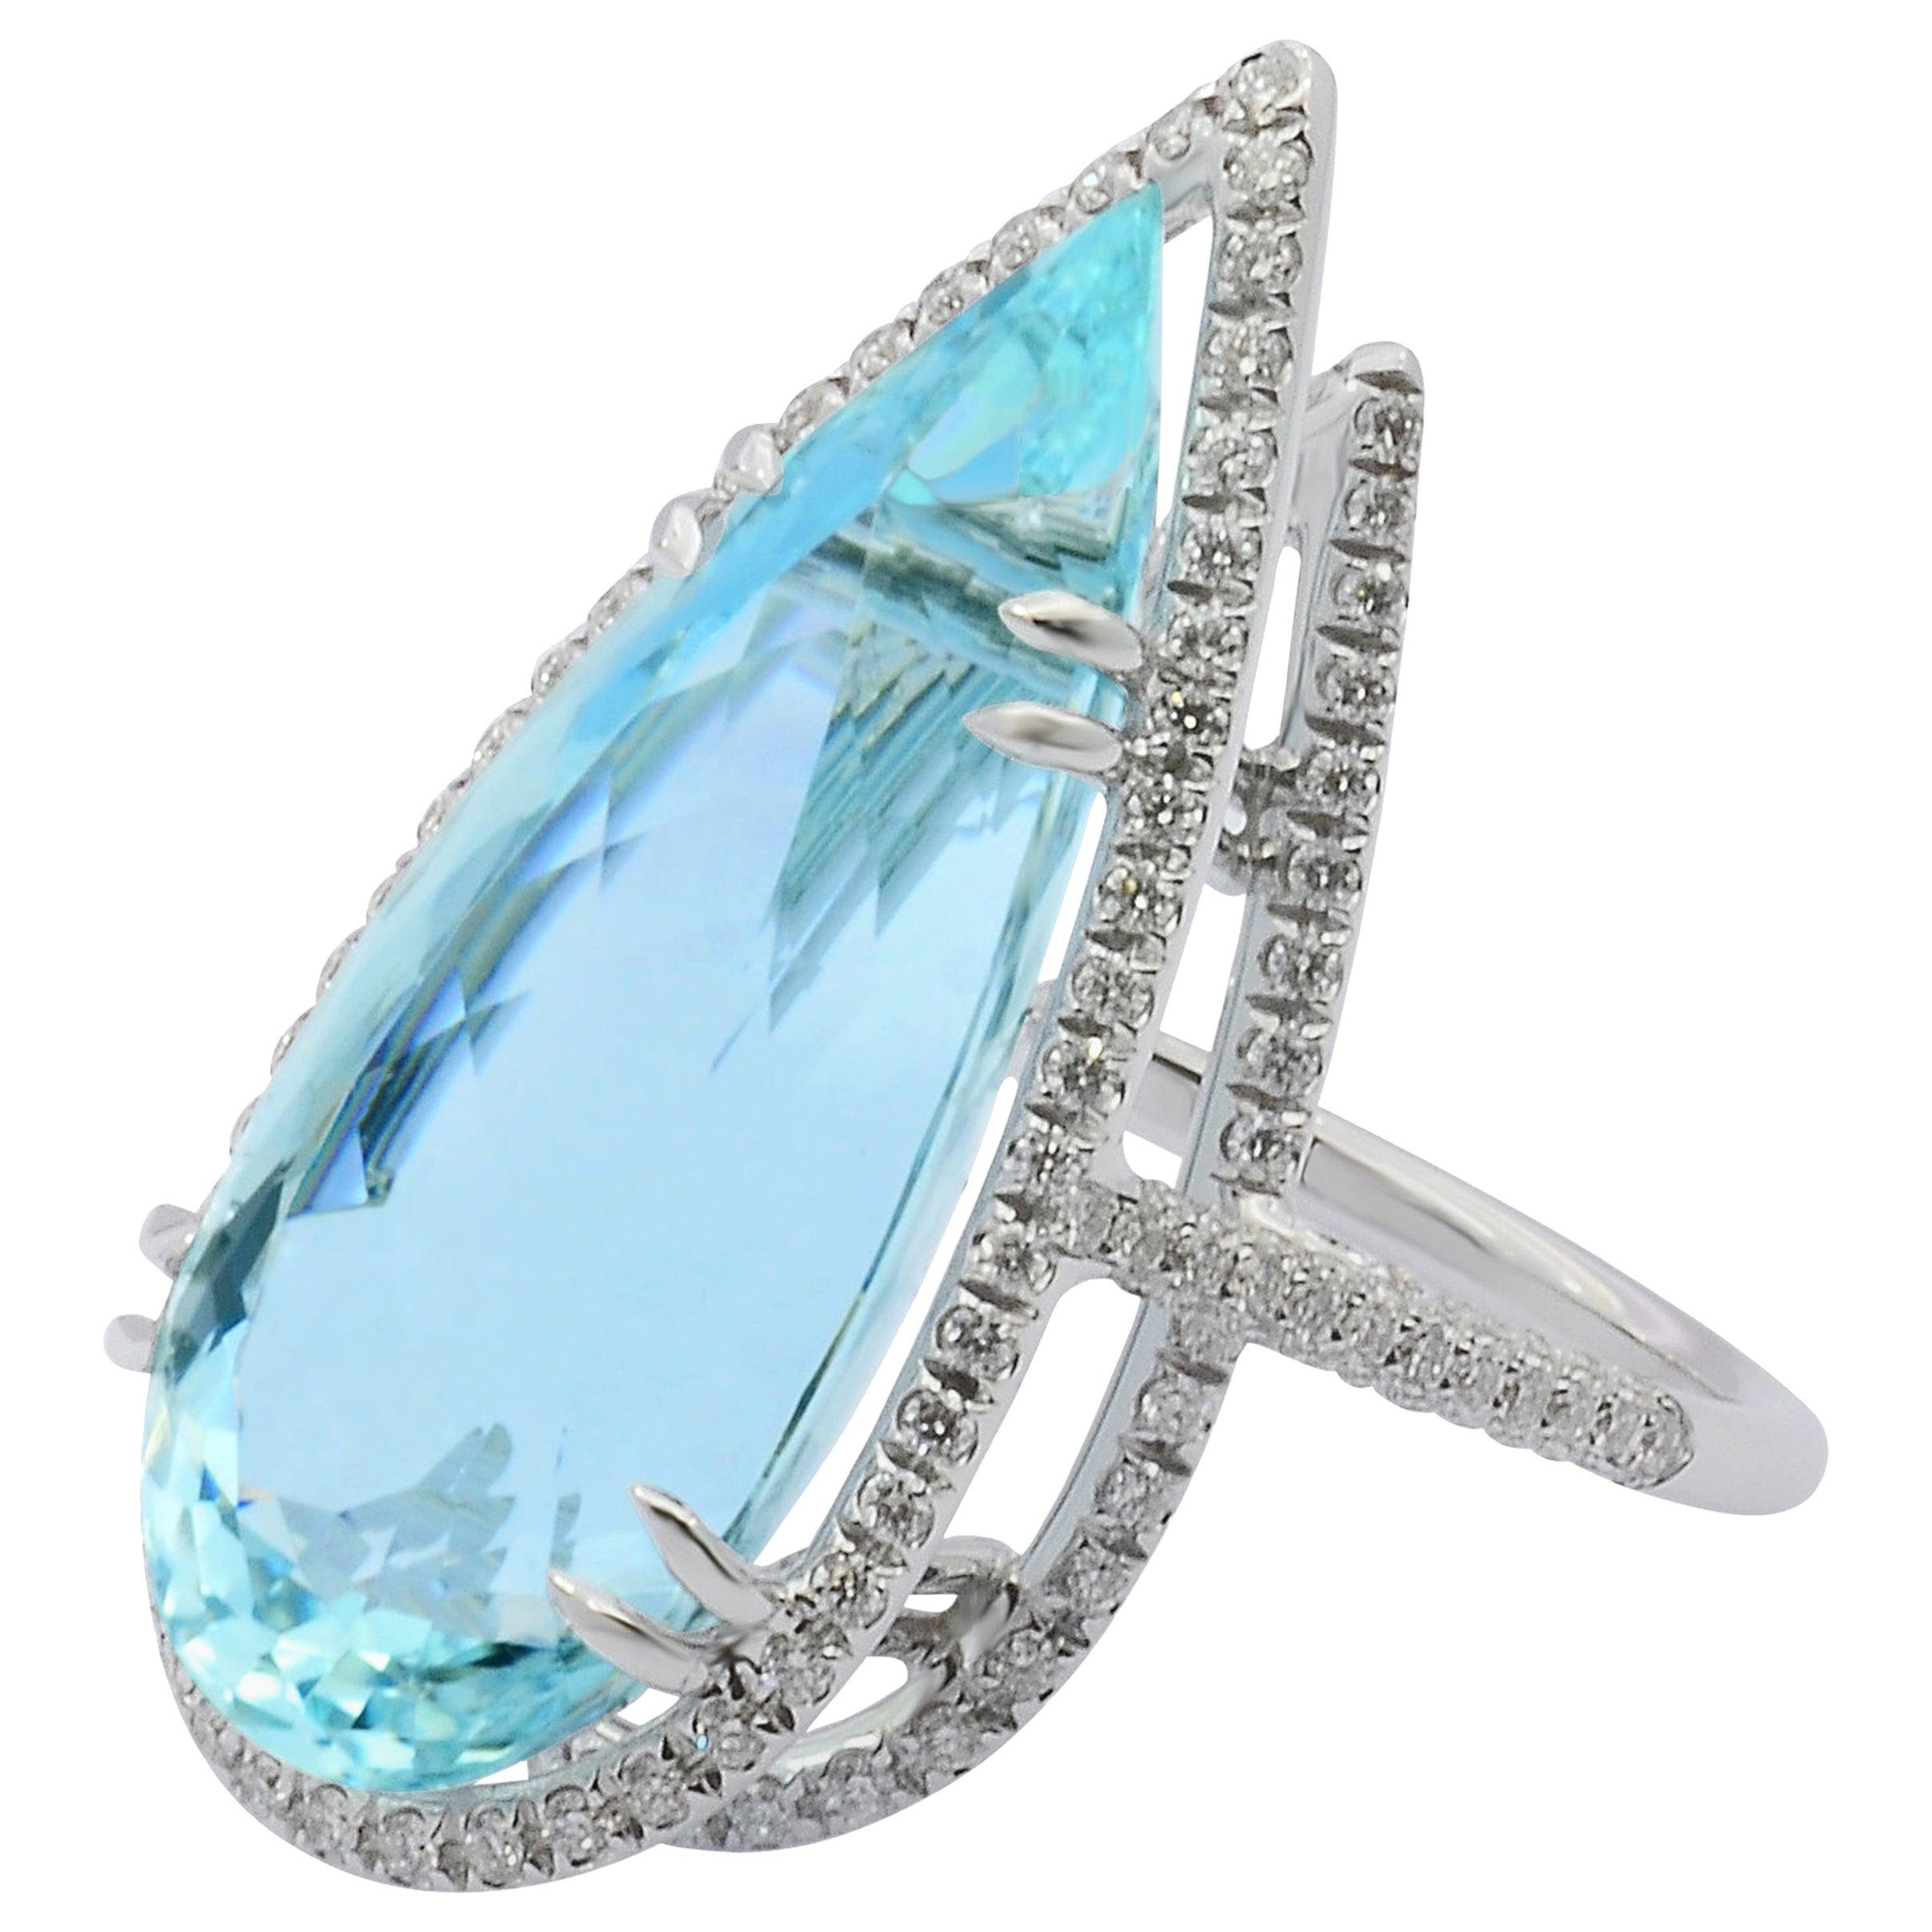 Handcrafted in Margherita Burgener workshop based  in Valenza, Italy, the enchanting ring is centering a Brazilian 22.27 carat aquamarine, drop cut, surrounded by a double line of diamonds.

18 KT white gold g 7.54
n. 178 diamond ct 1.04 quality of